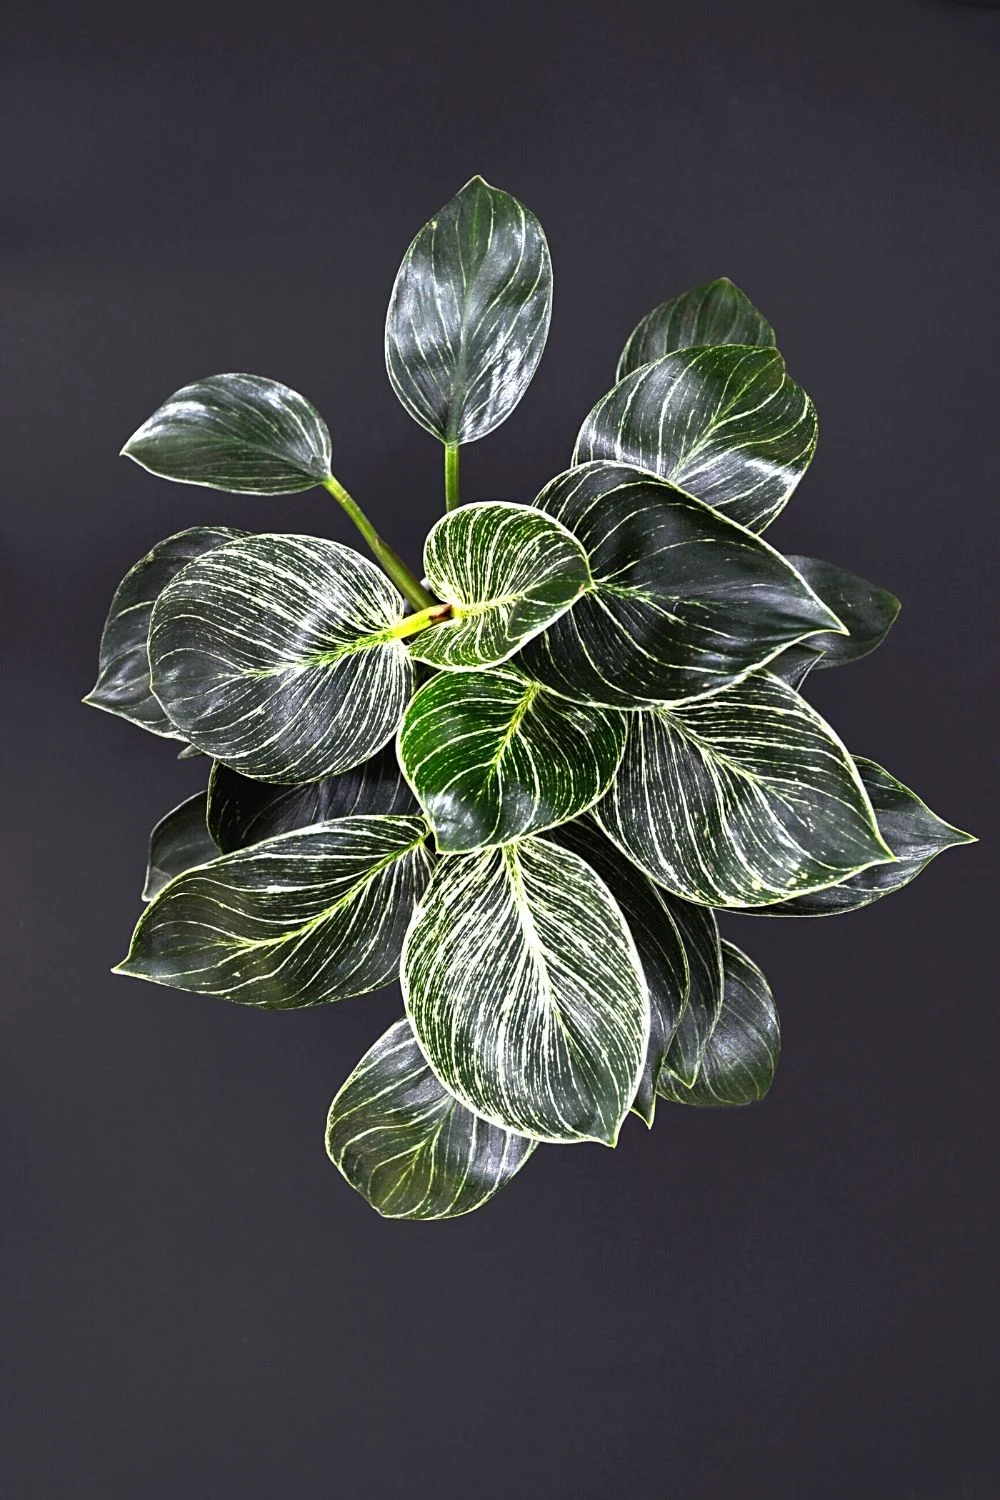 Philodendron Birkin came to be because of a rare gene mutation in the Rojo Congo Philodendron